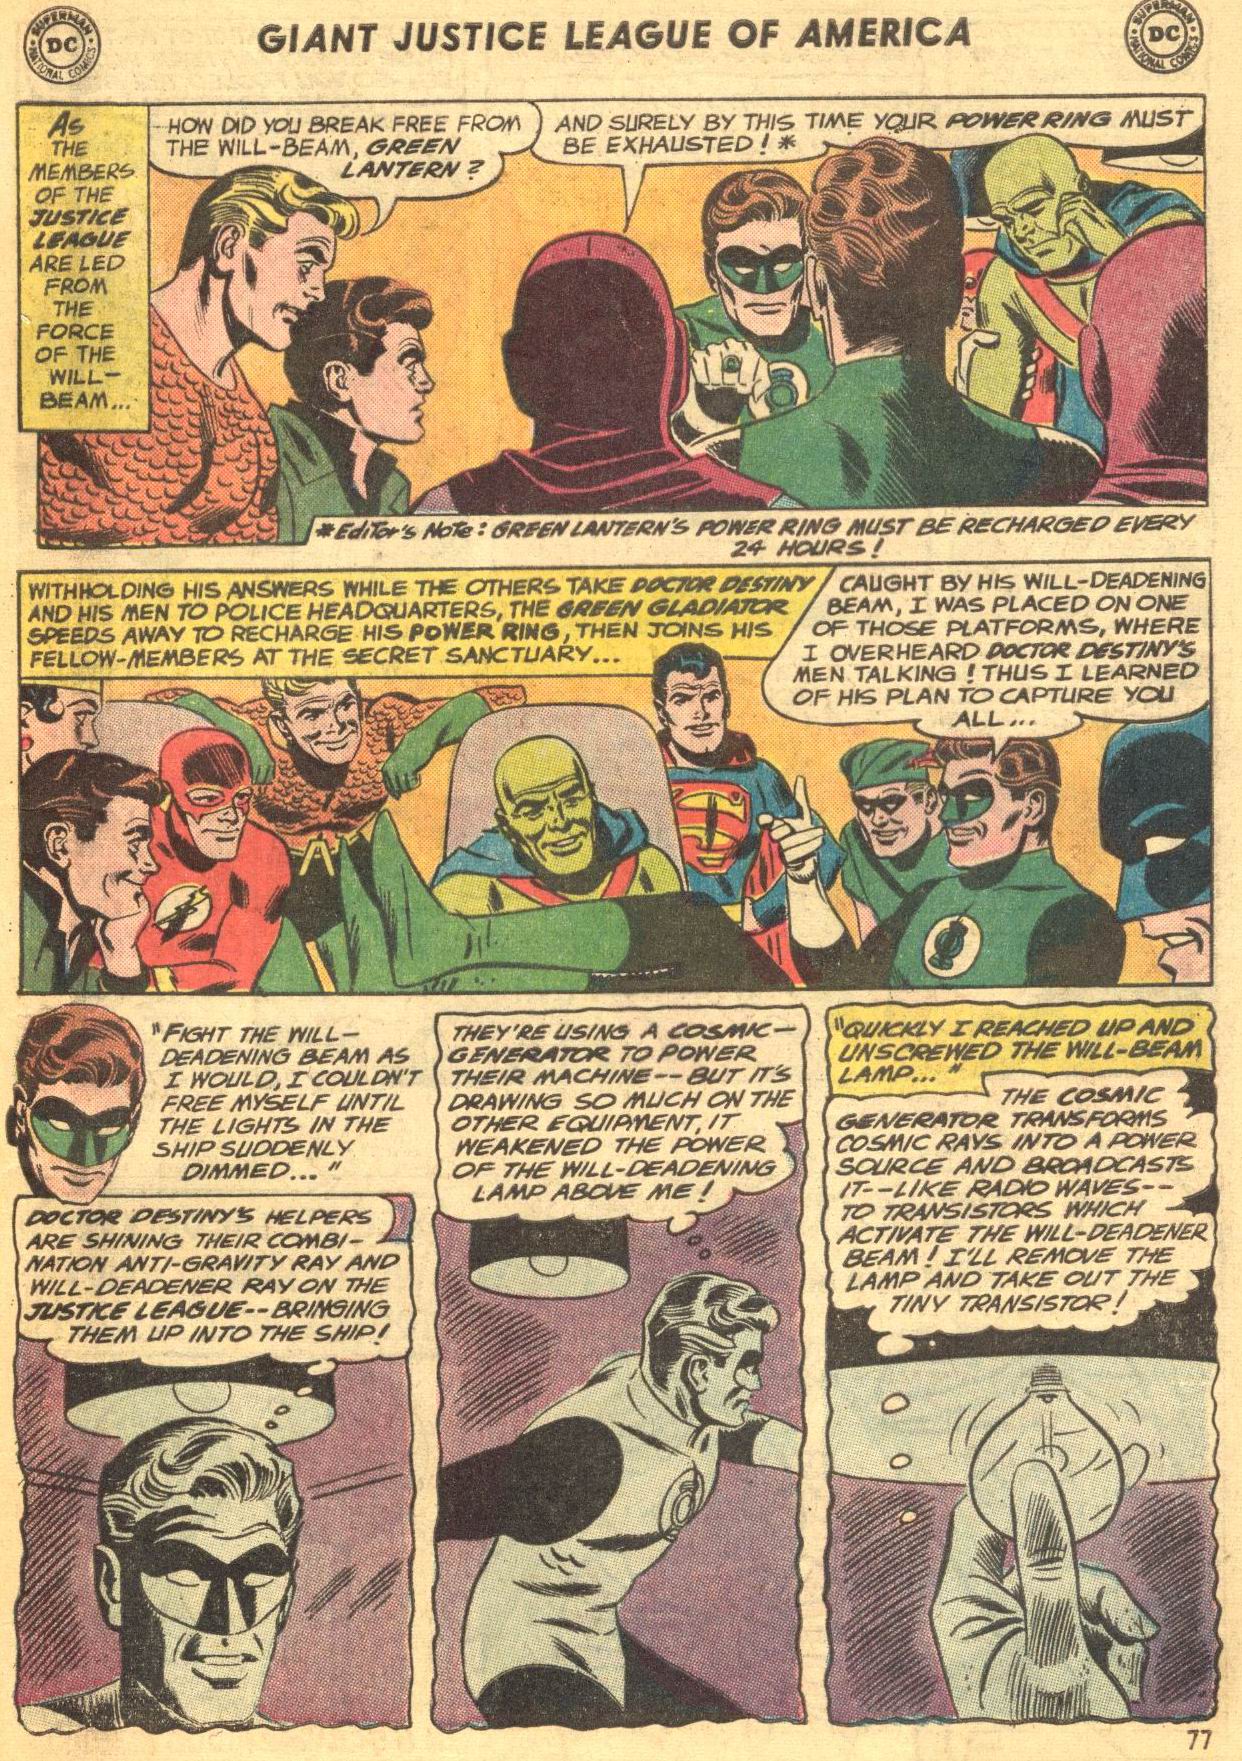 Justice League of America (1960) 39 Page 78